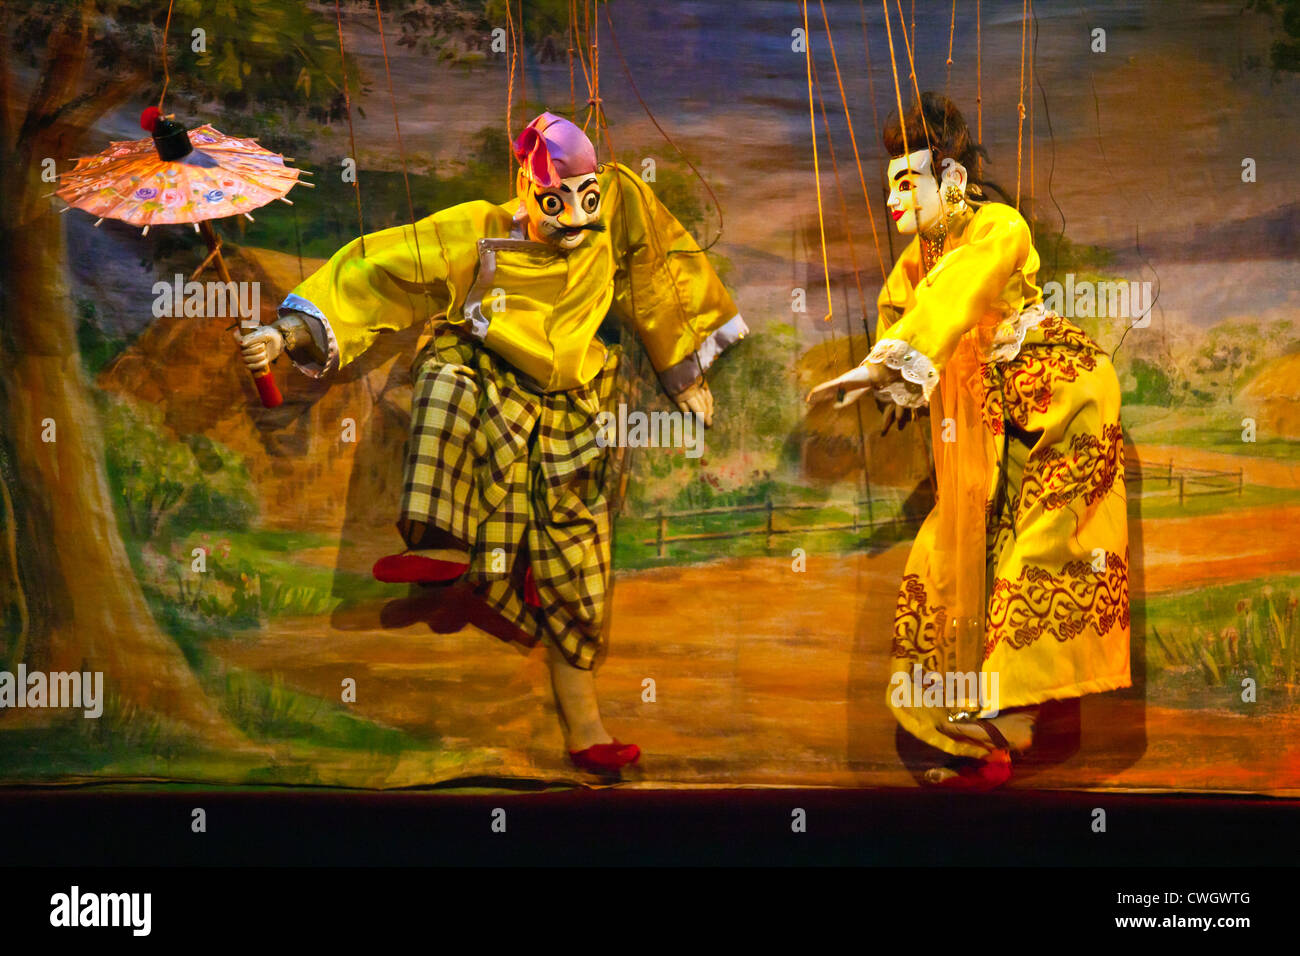 PUPPETRY is an ancient art which the MANDALAY MARIONETTES THEATER is keeping alive - MANDALAY, MYANMAR Stock Photo